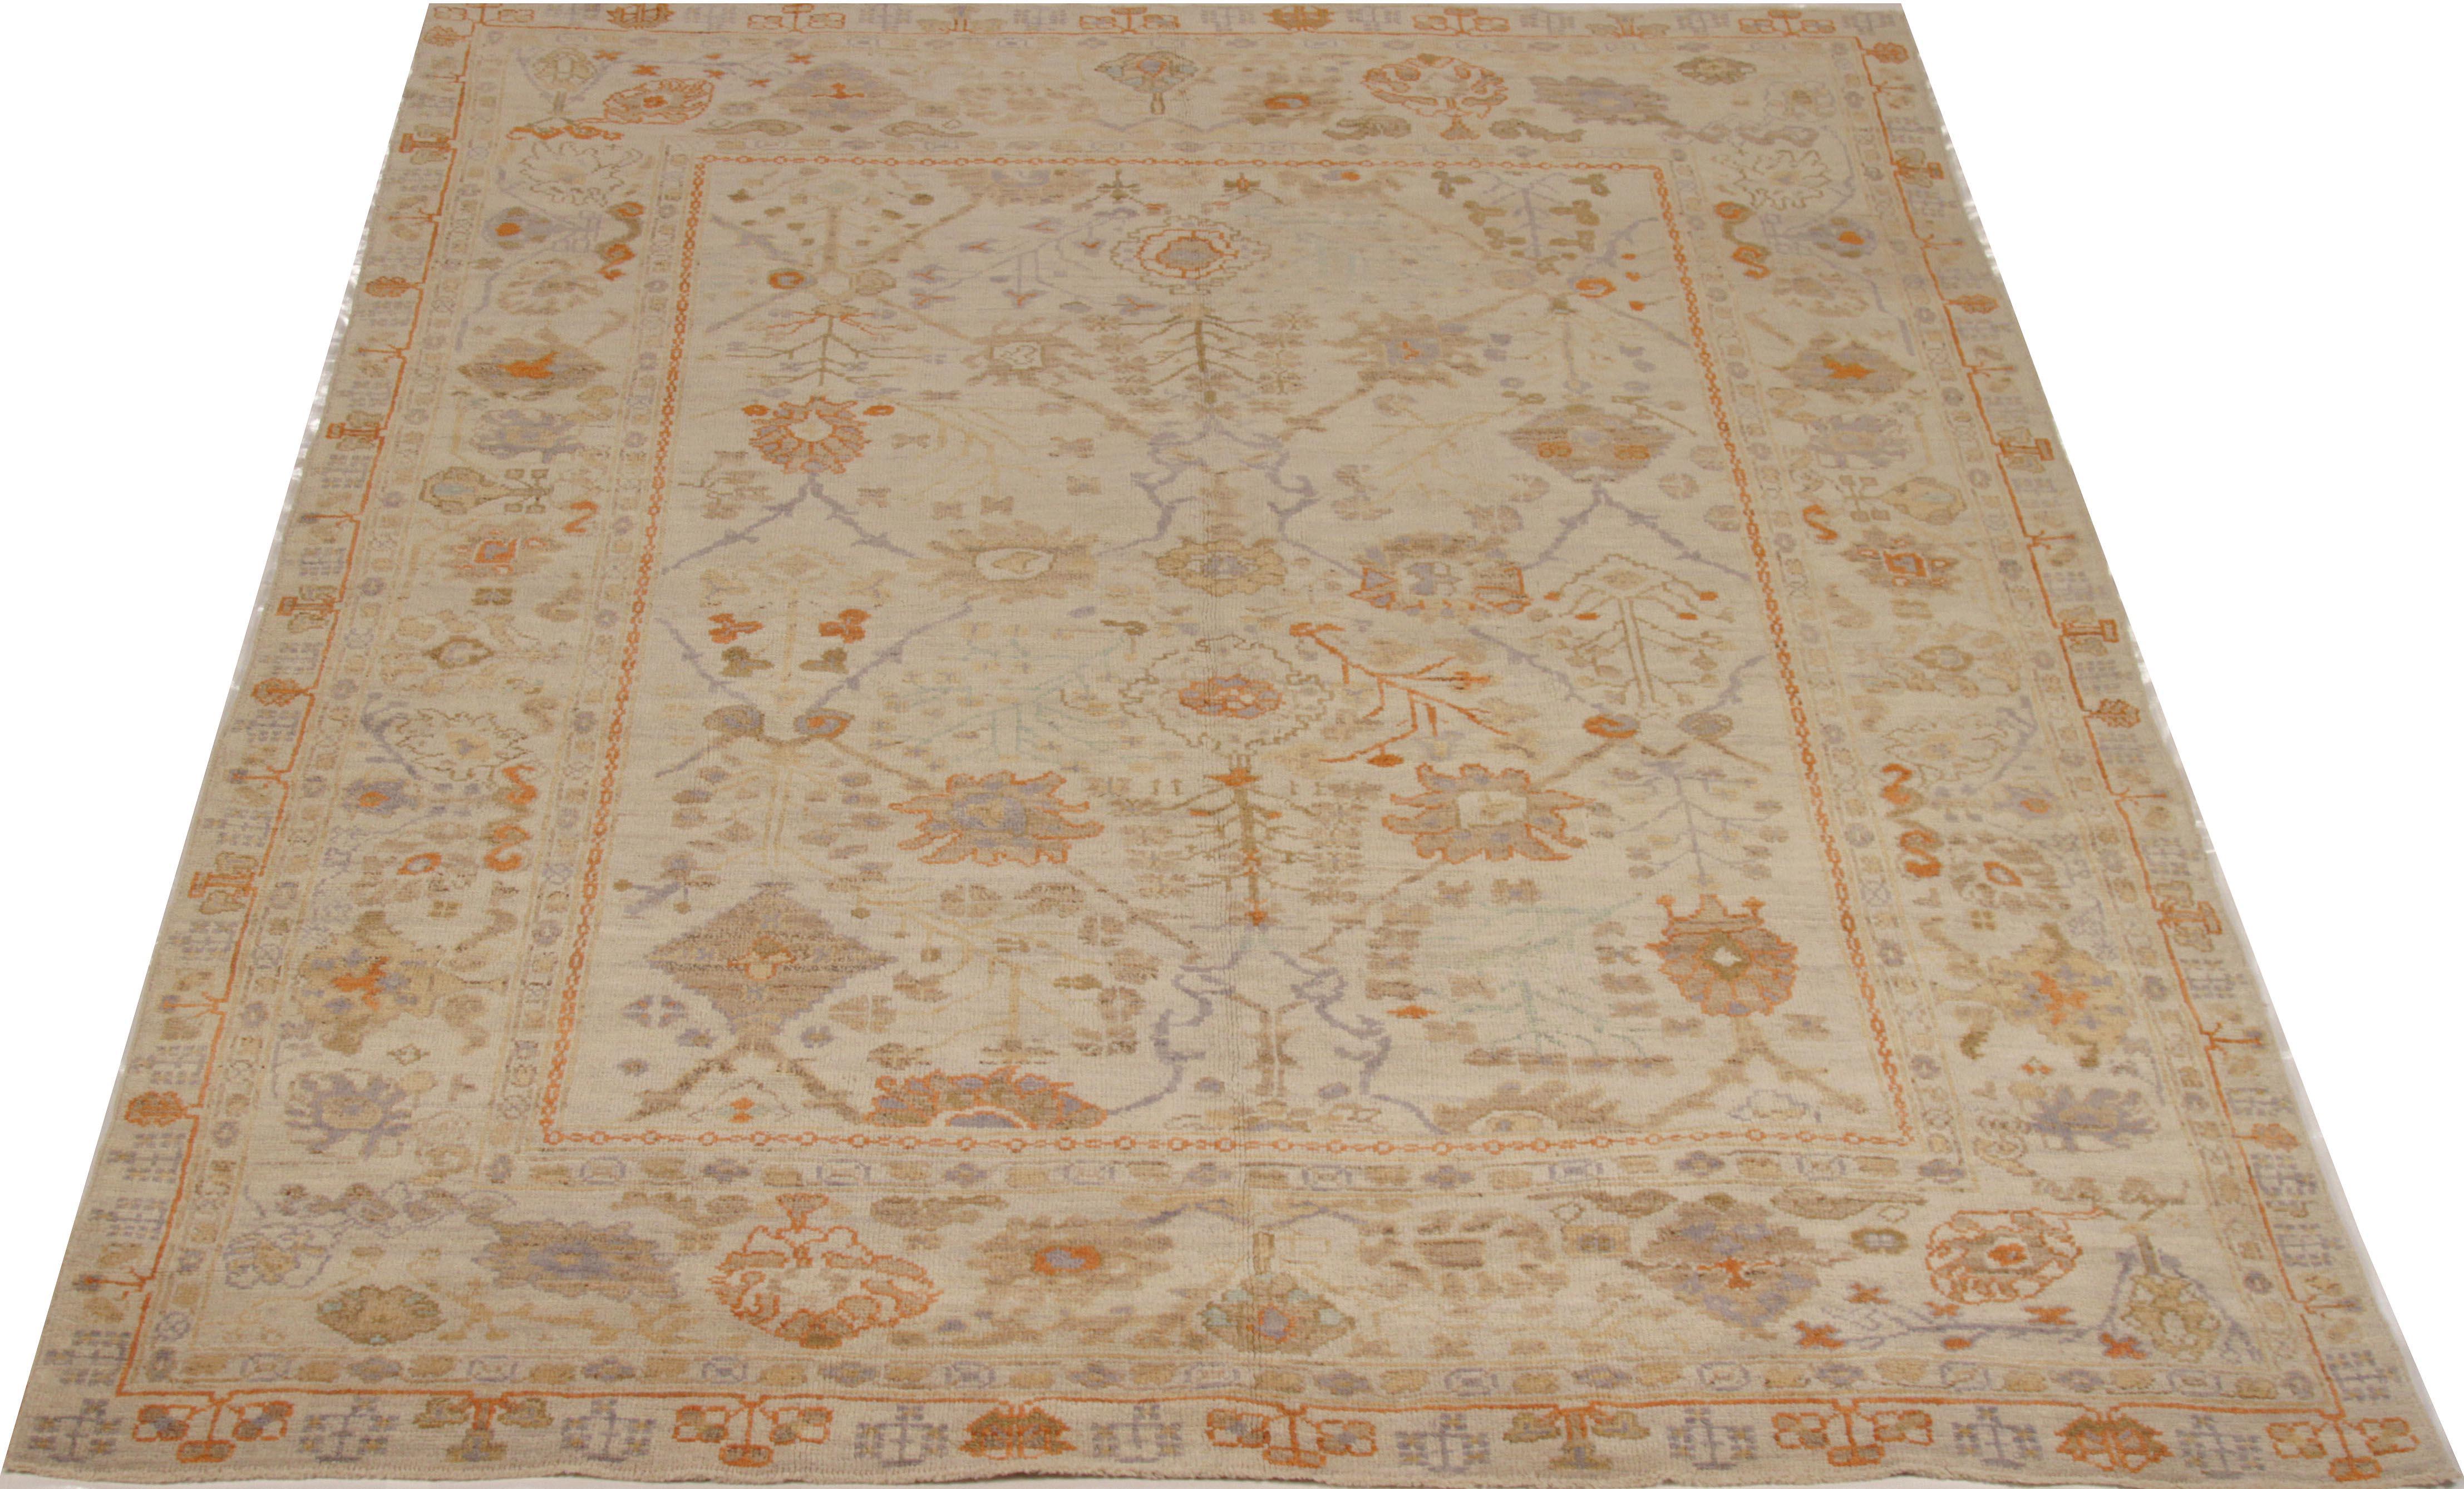 Handwoven Persian rug from fine wool and rich vegetable dyes. It’s a new production piece created in the tradition of ancient Oushak weaving. It features Classic floral details in blue and orange hues over a beige field. It’s a great rug for modern,